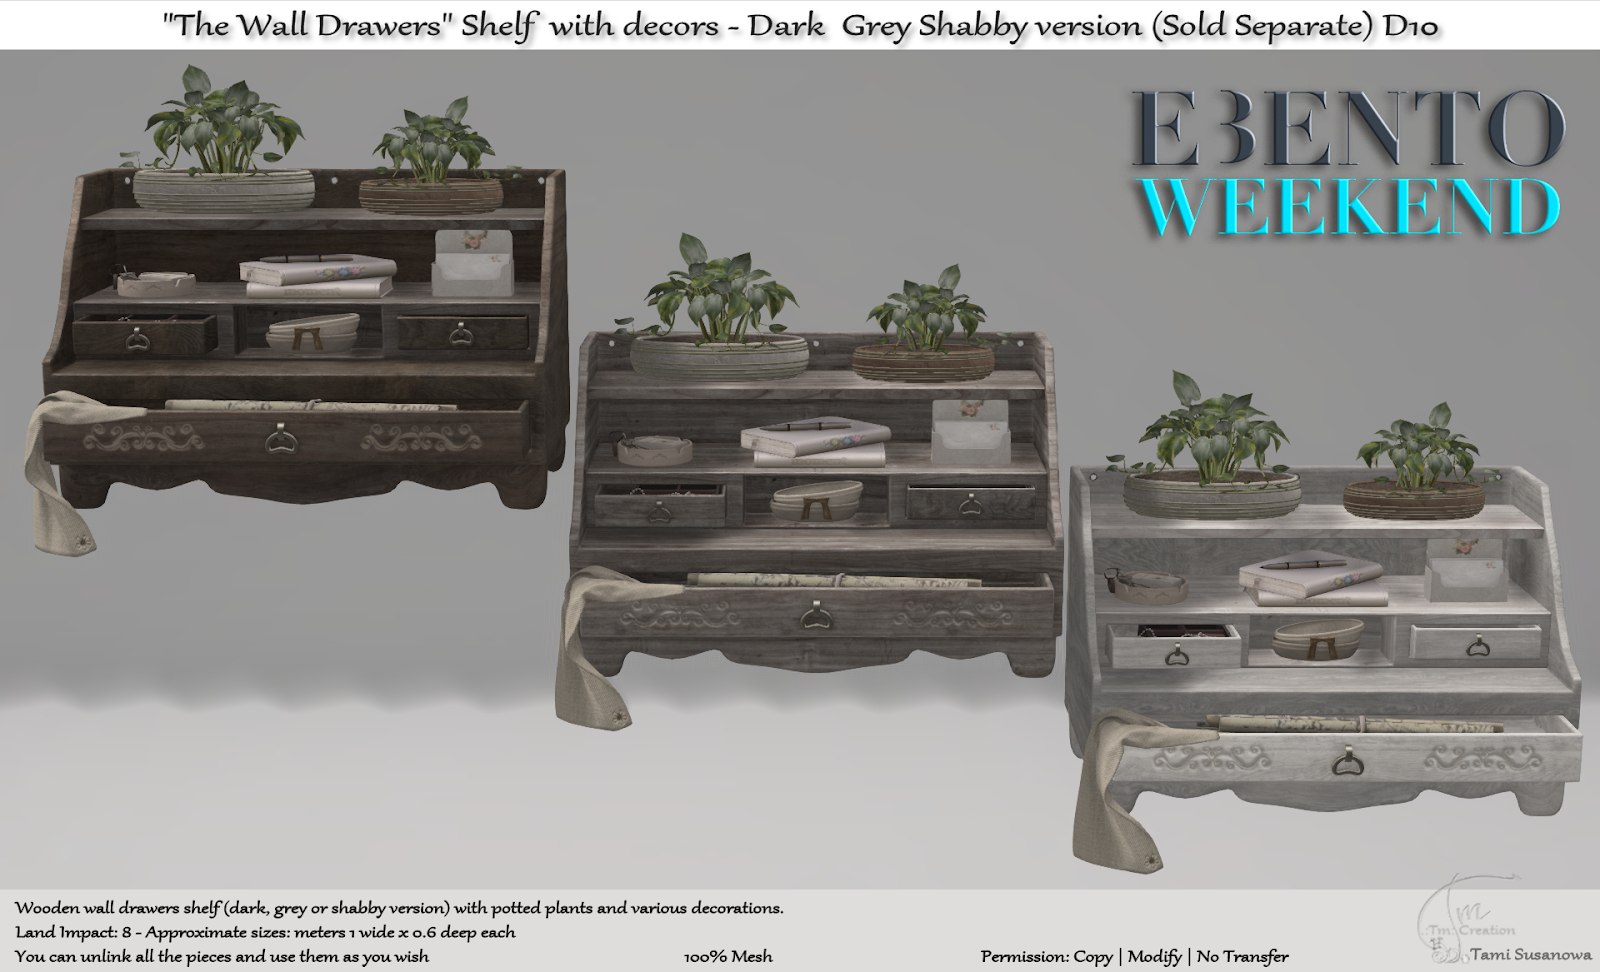 TM Creation – “The Wall Drawers” Shelf with Decors